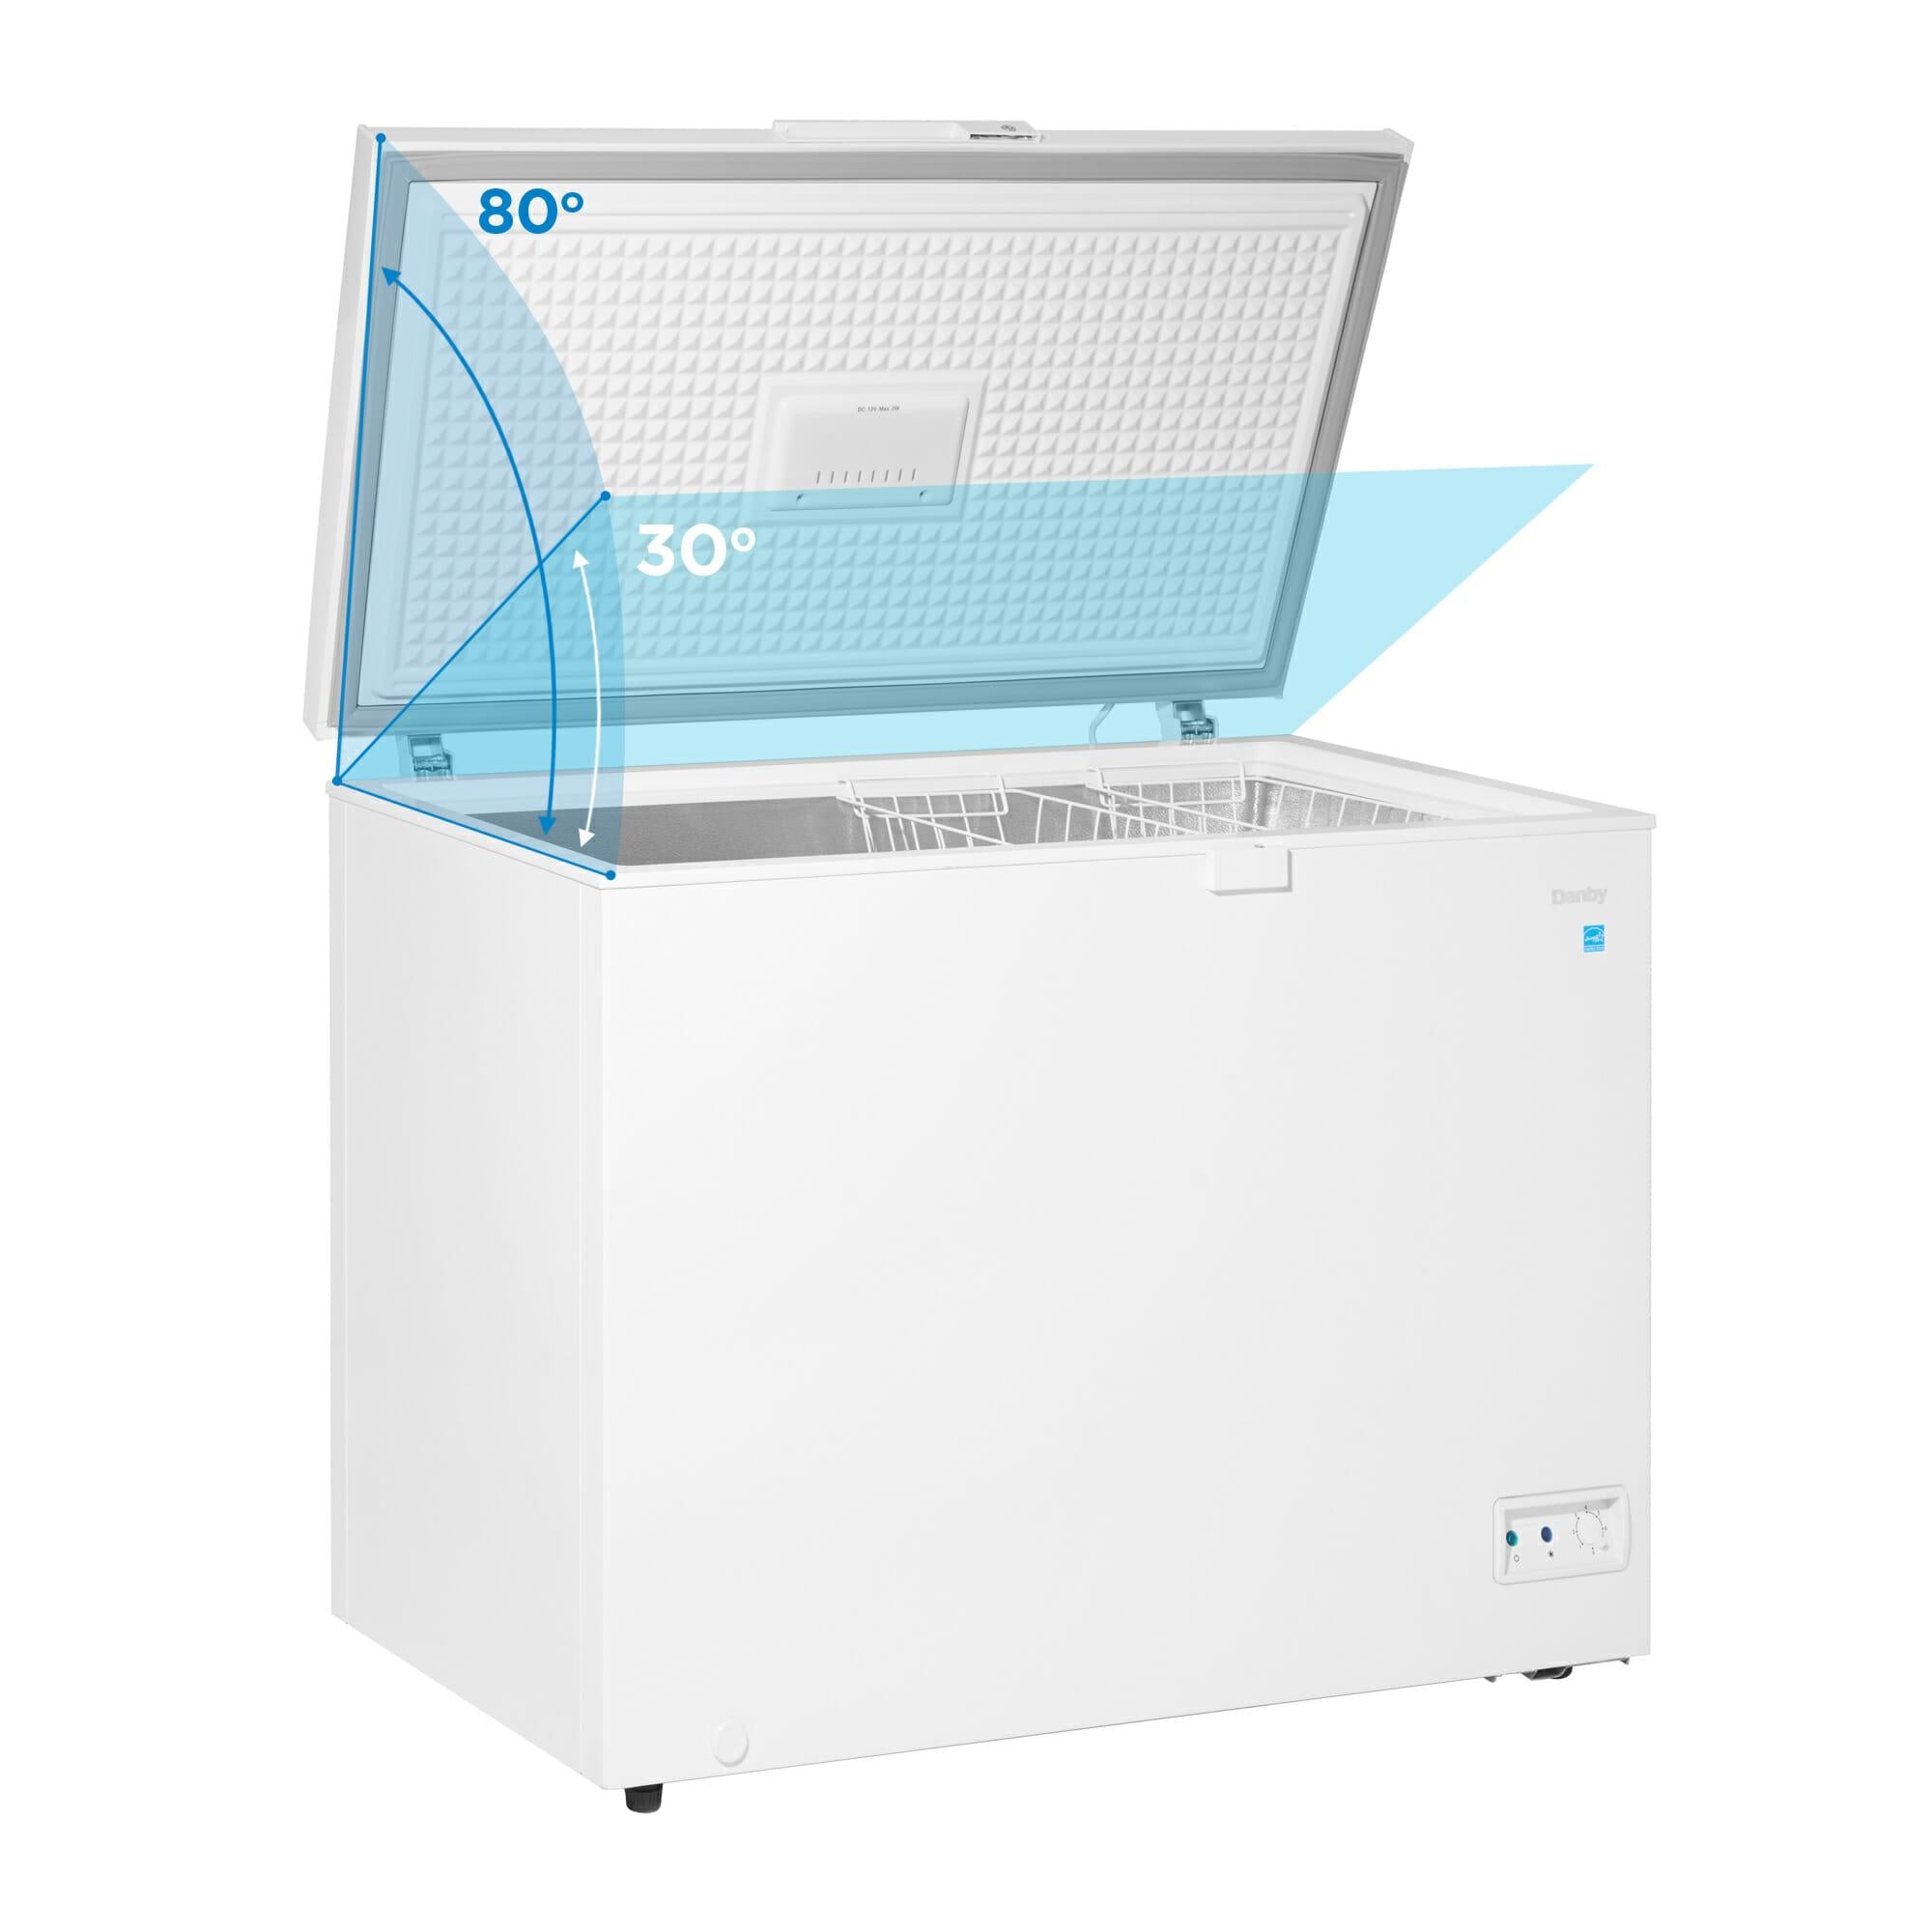 Danby 10.00 cu. ft. Chest Freezer in White